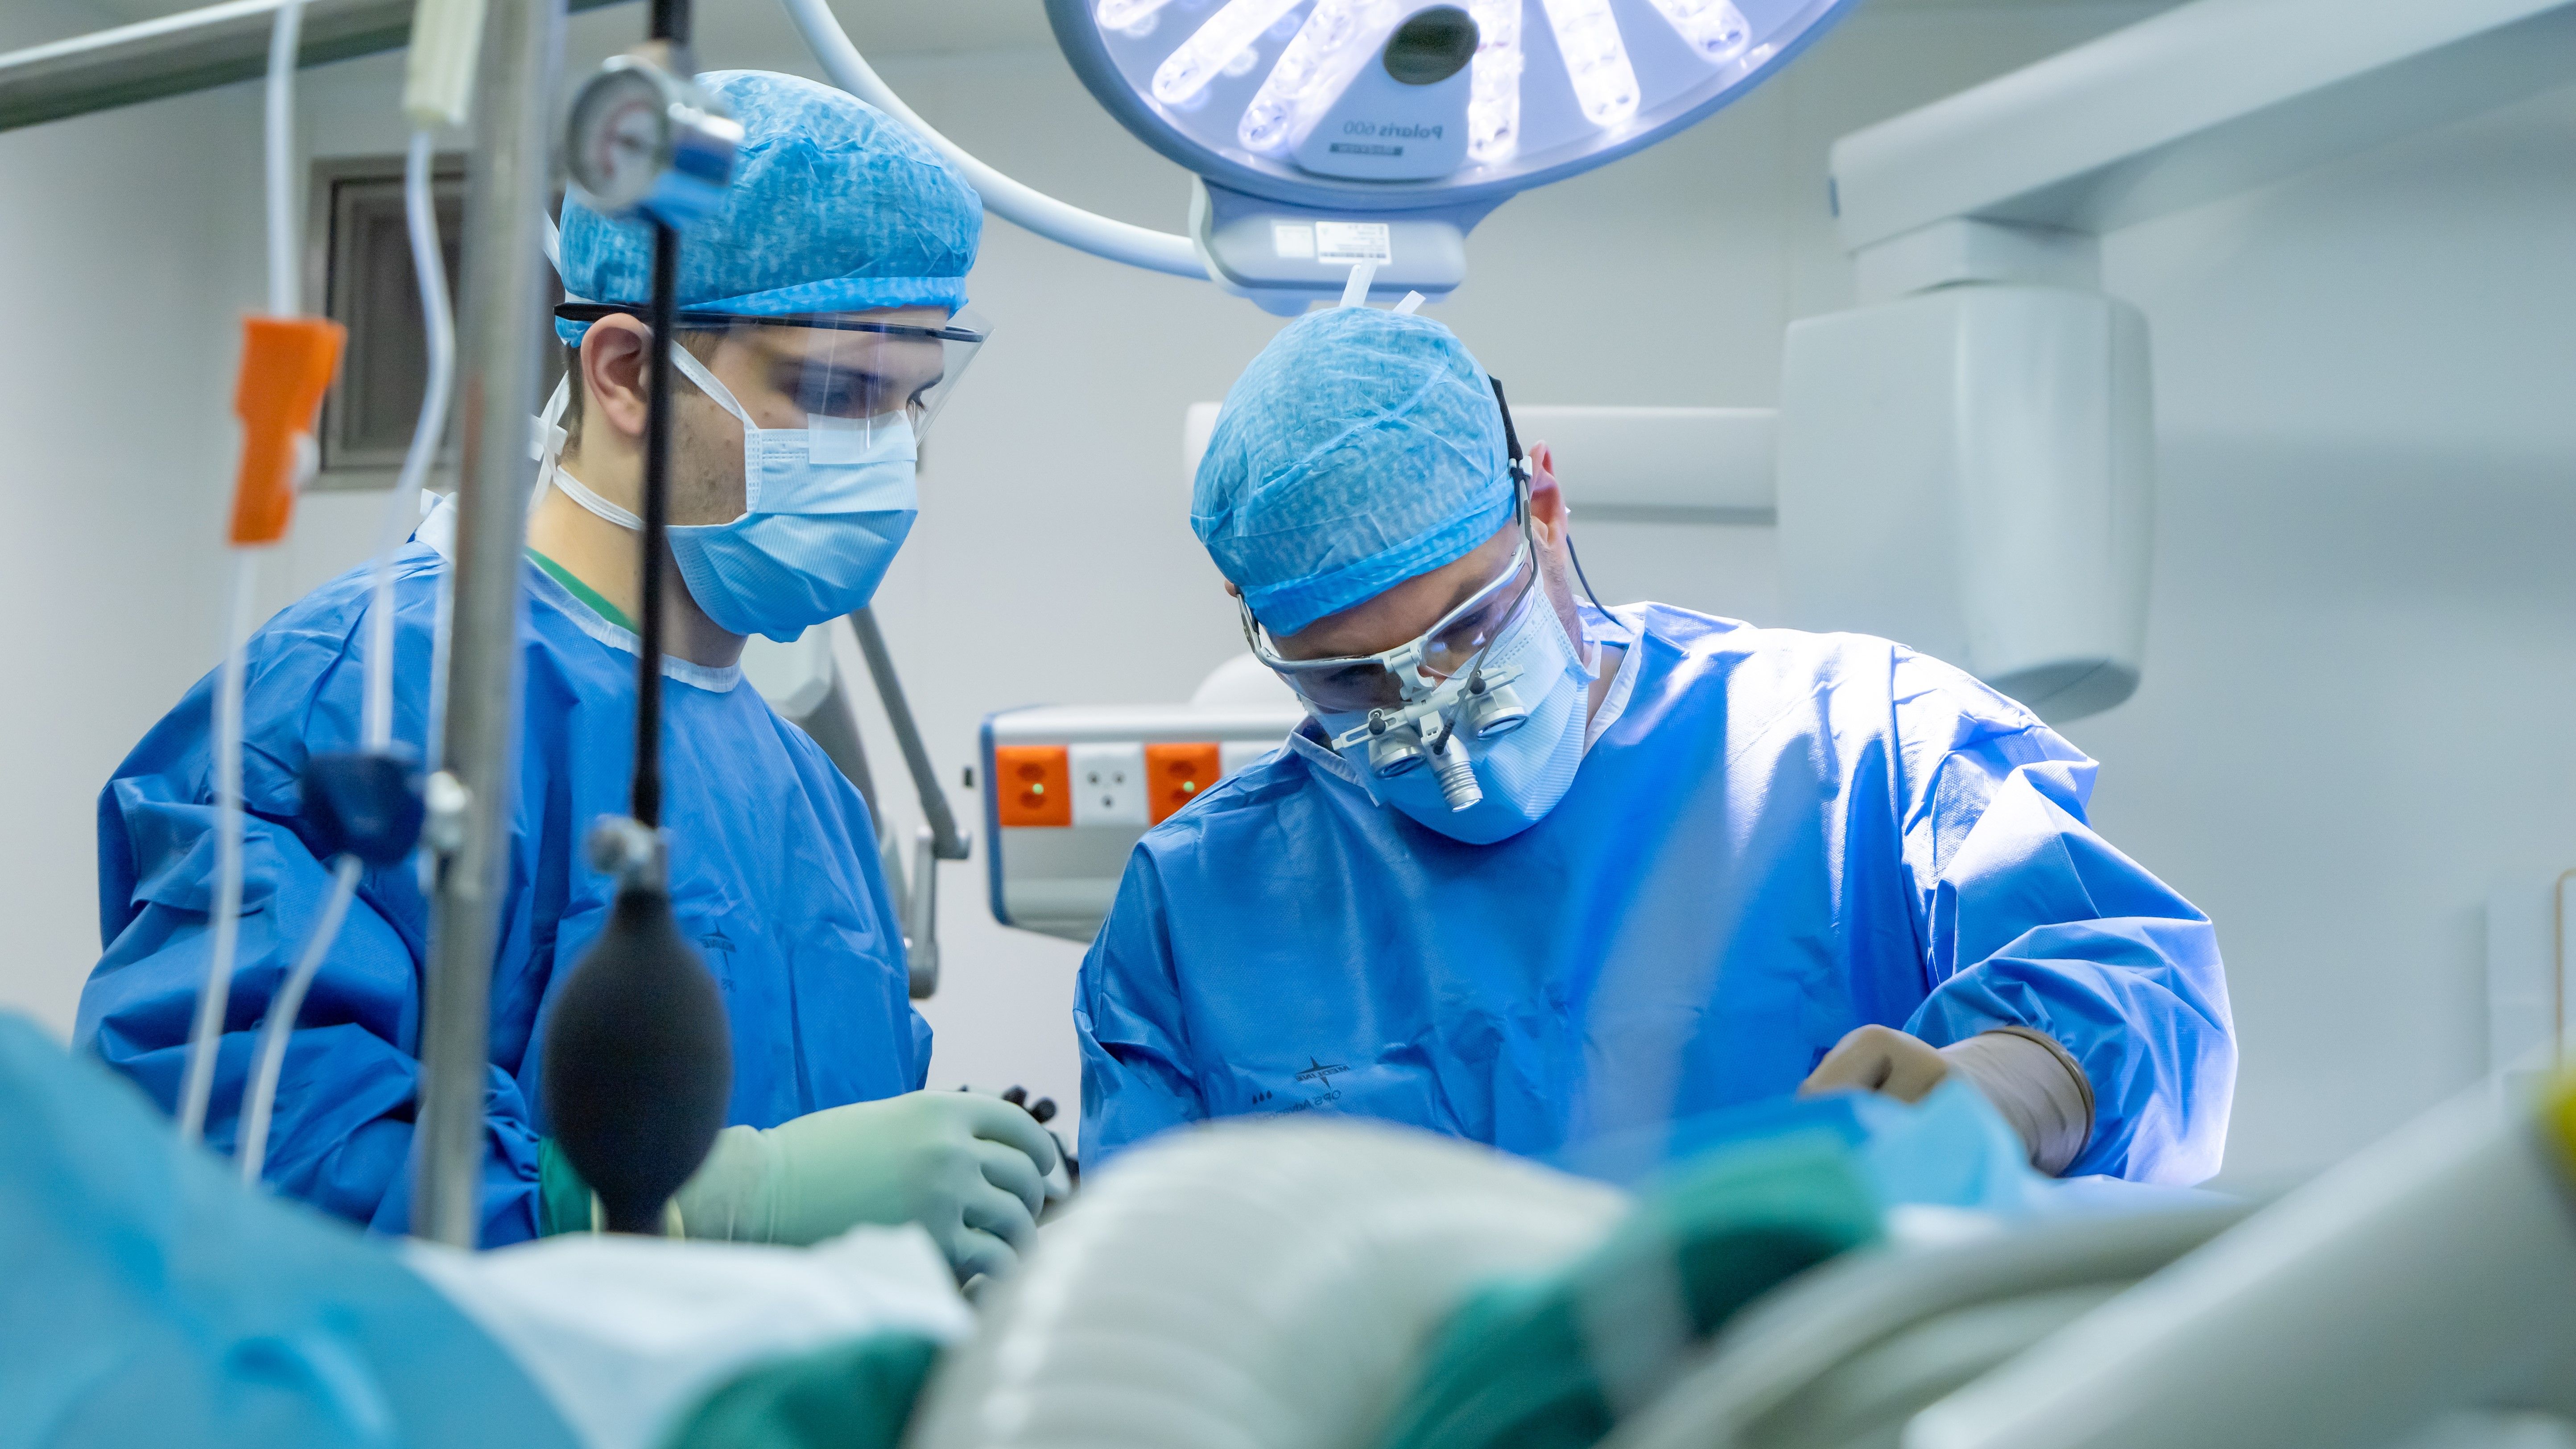 Surgeons of MKG during a procedure